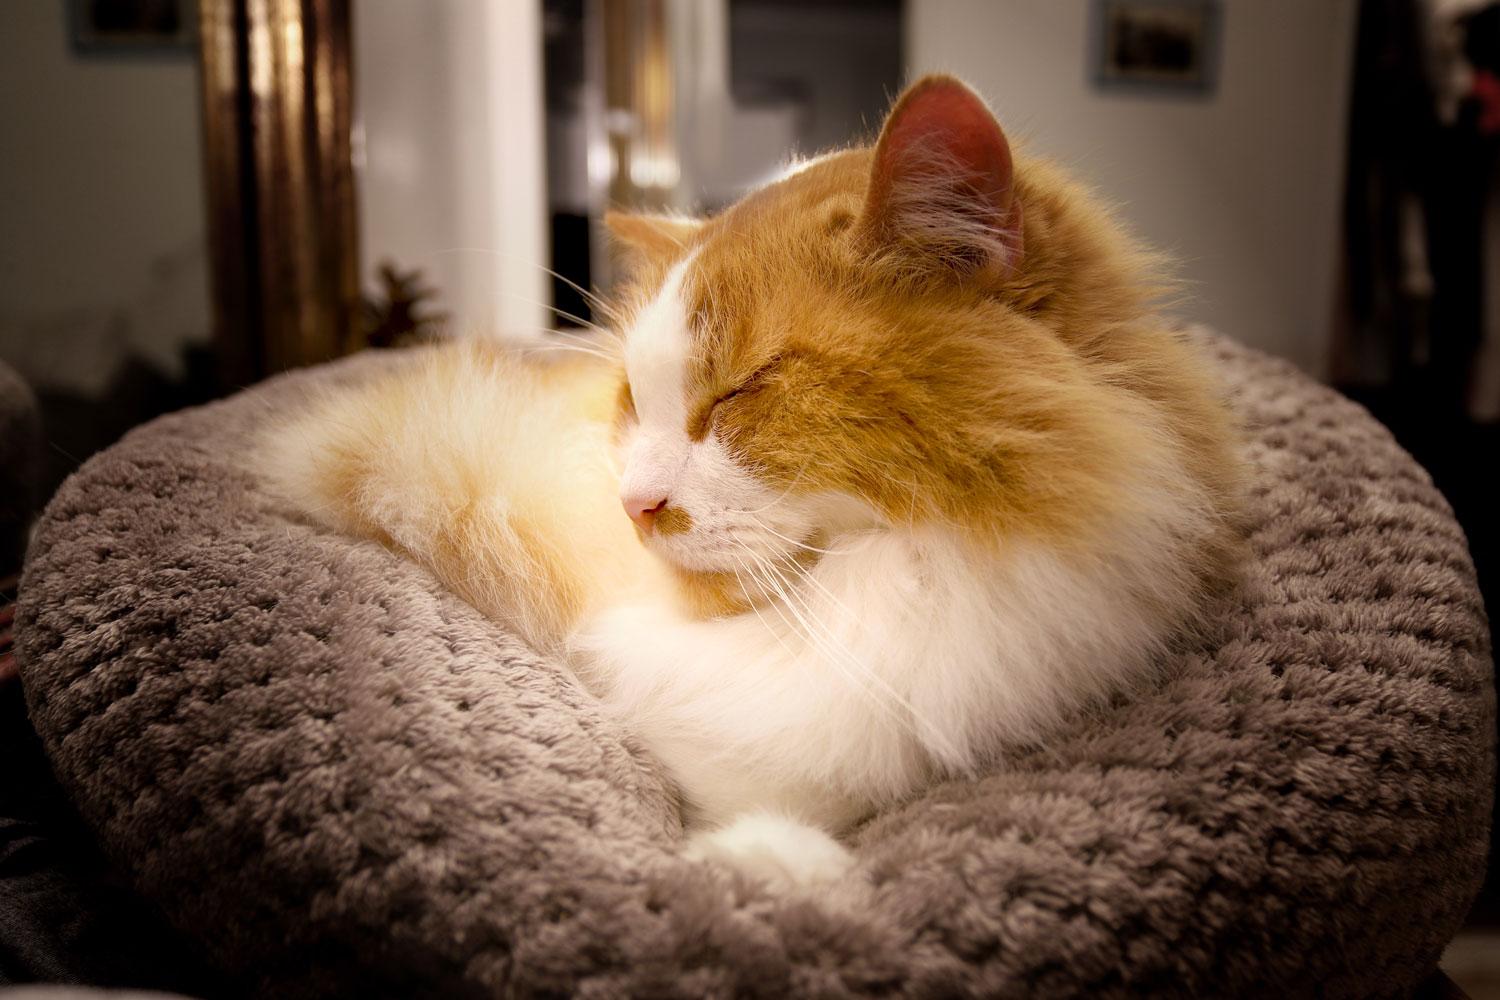 A long haired orange and white car sleeping on his small pouf bed